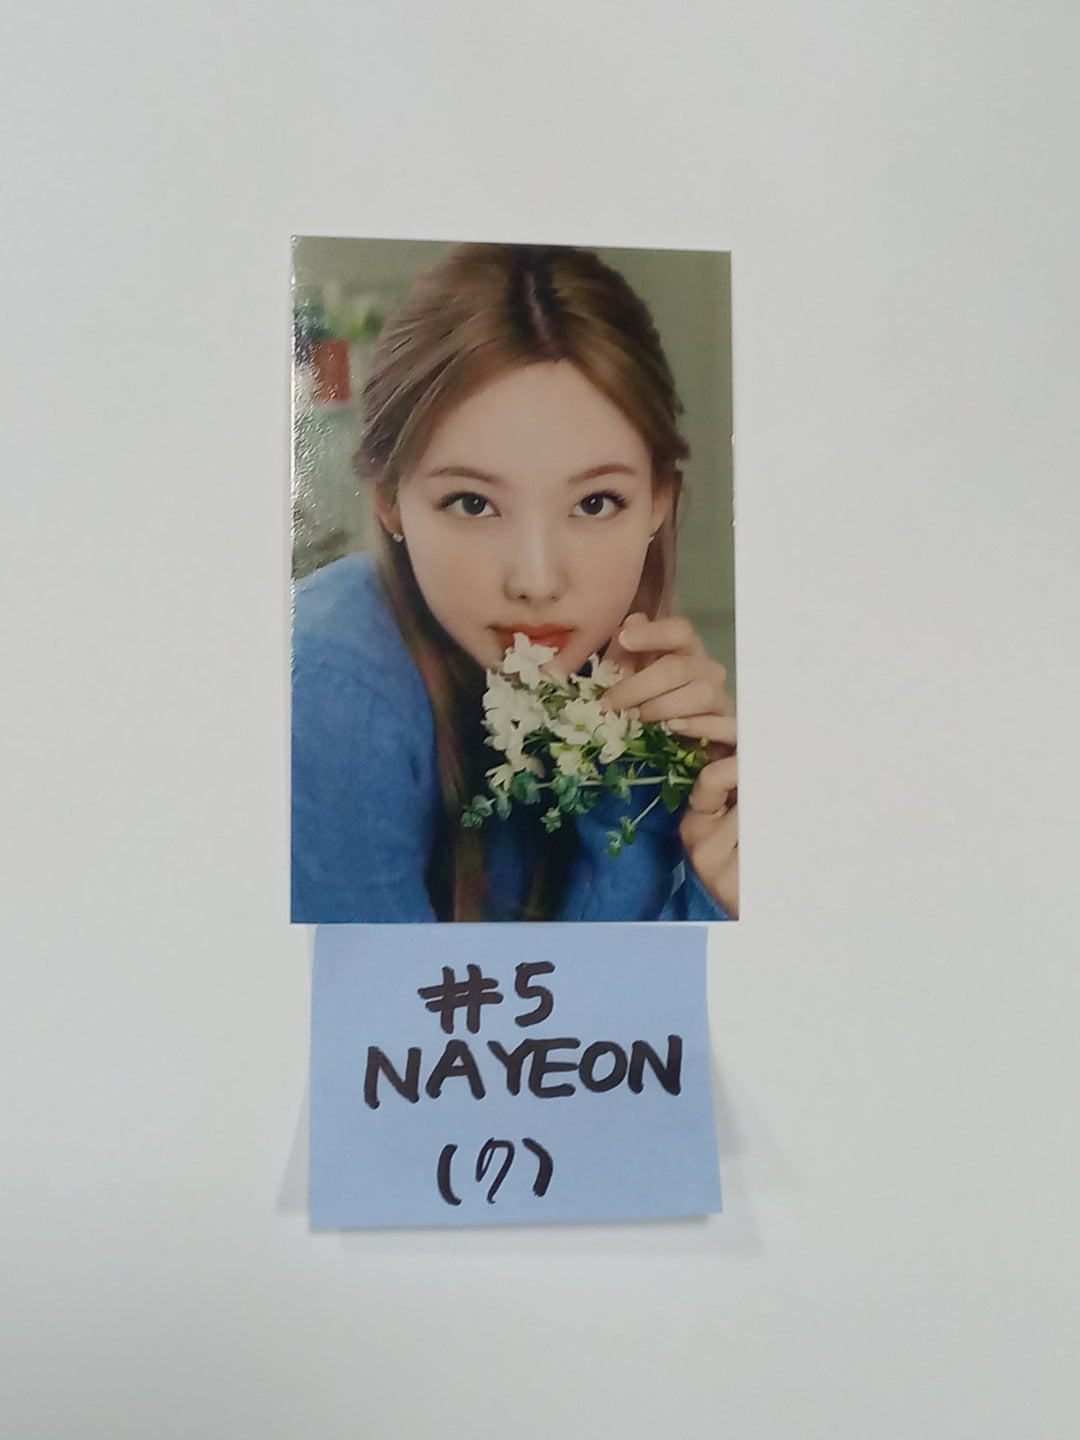 Twice 7th Anniversary EVENT - Official Trading Card (1)